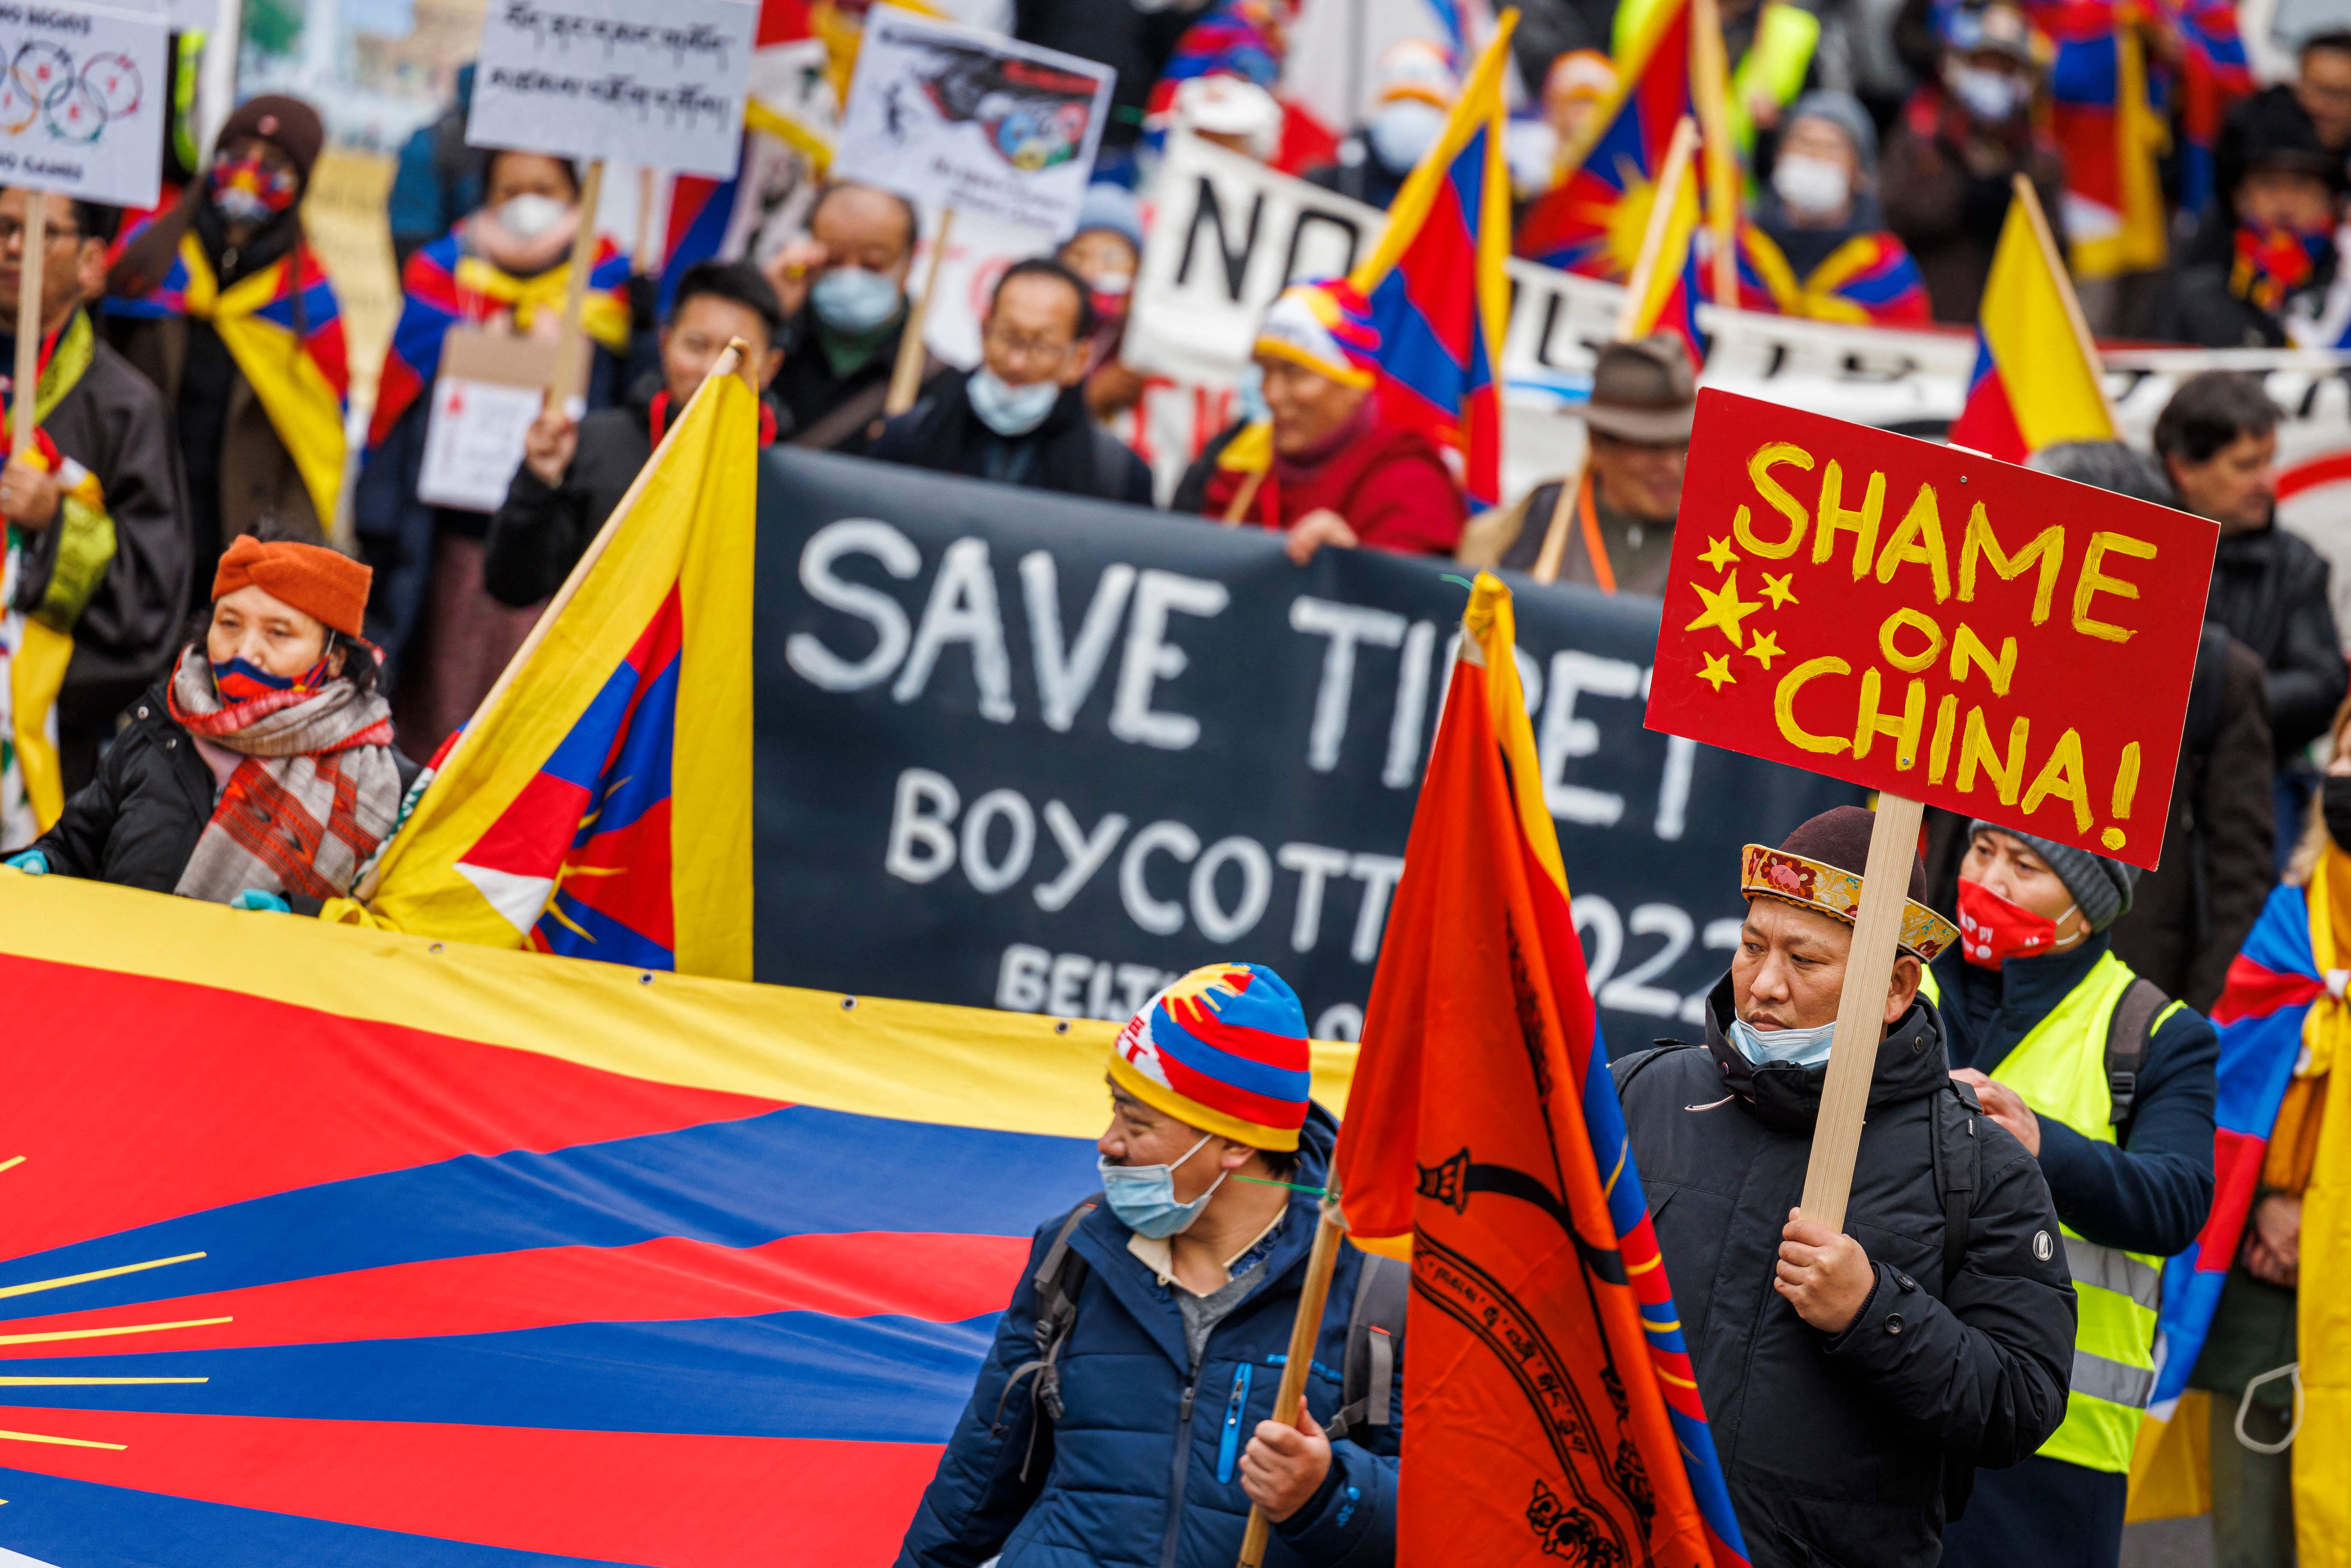 Tibetan protesters take part in a protest march at the International Olympic Committee (IOC) headquarters in Lausanne, 3 February 2022